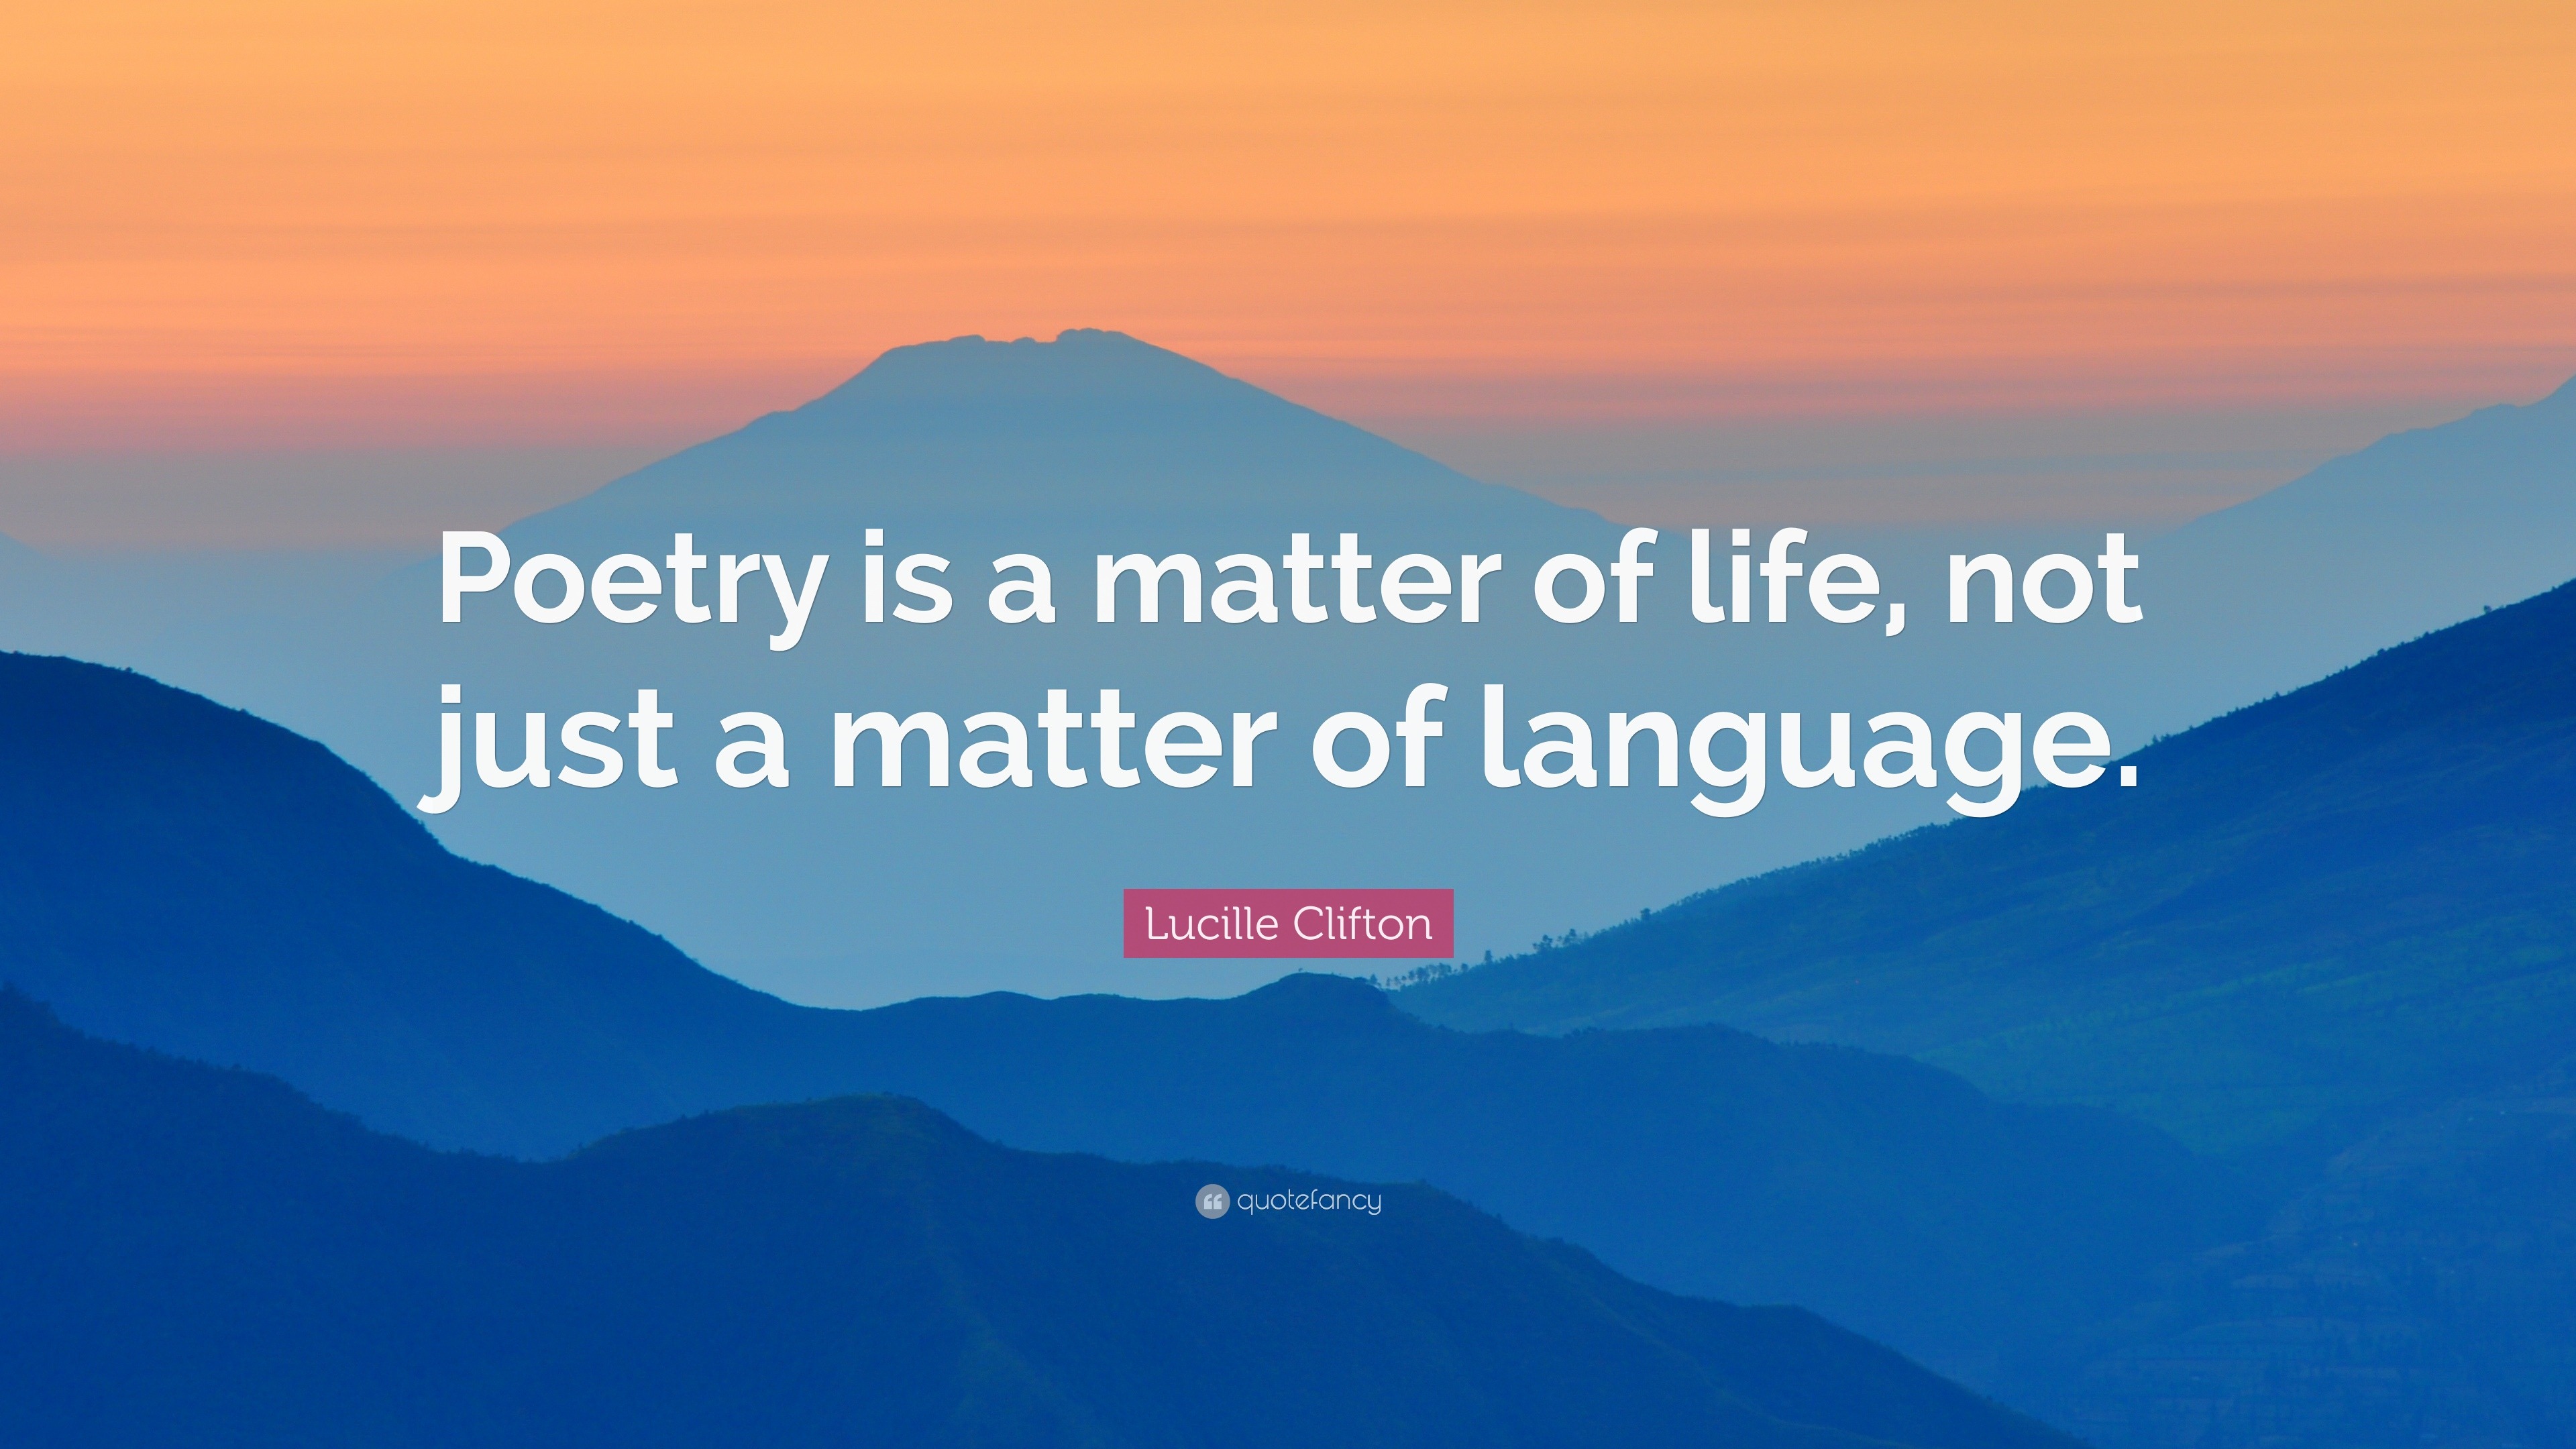 Lucille Clifton Quote: “Poetry is a matter of life, not just a matter ...